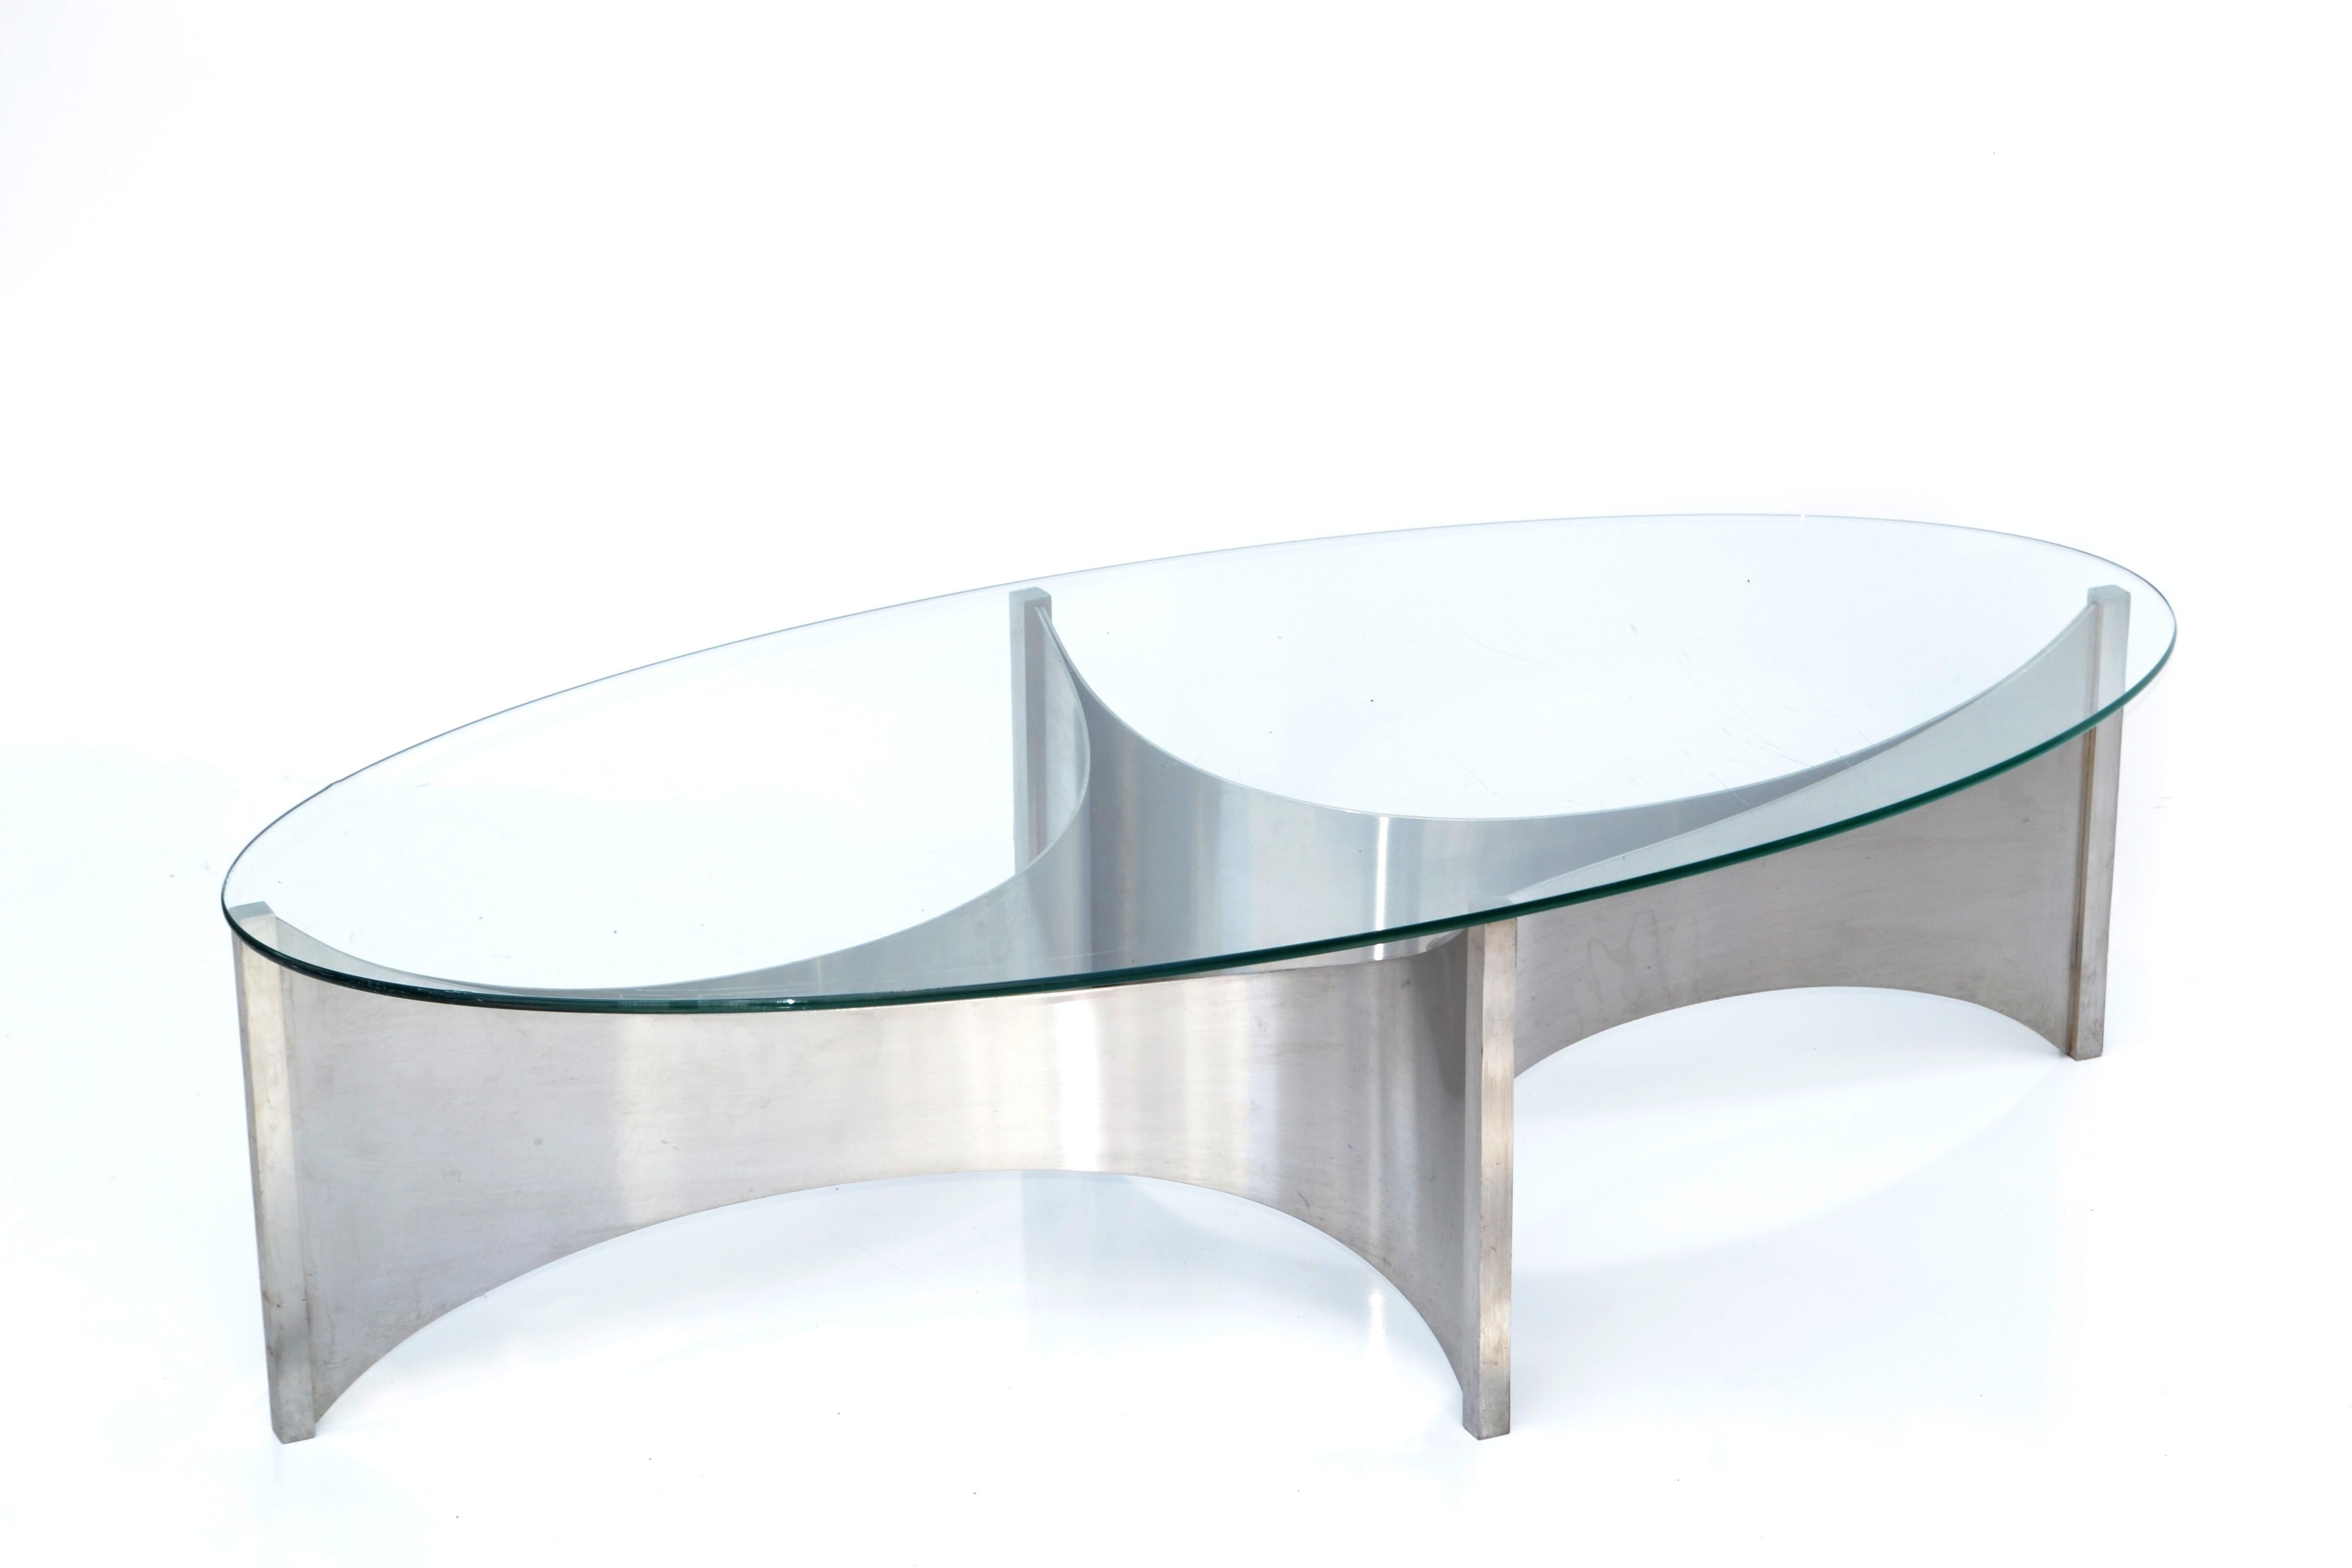 French Mid-Century Modern Maison Charles et Fils 'Voiles' brushed stainless steel coffee table made in 1980.
Sculptural silver base with oval glass top.
Provenance: Page 267 catalogue Charles, 2013.
'Arceaux/Voiles.'
Dimensions:
Base: 46.5 x 23